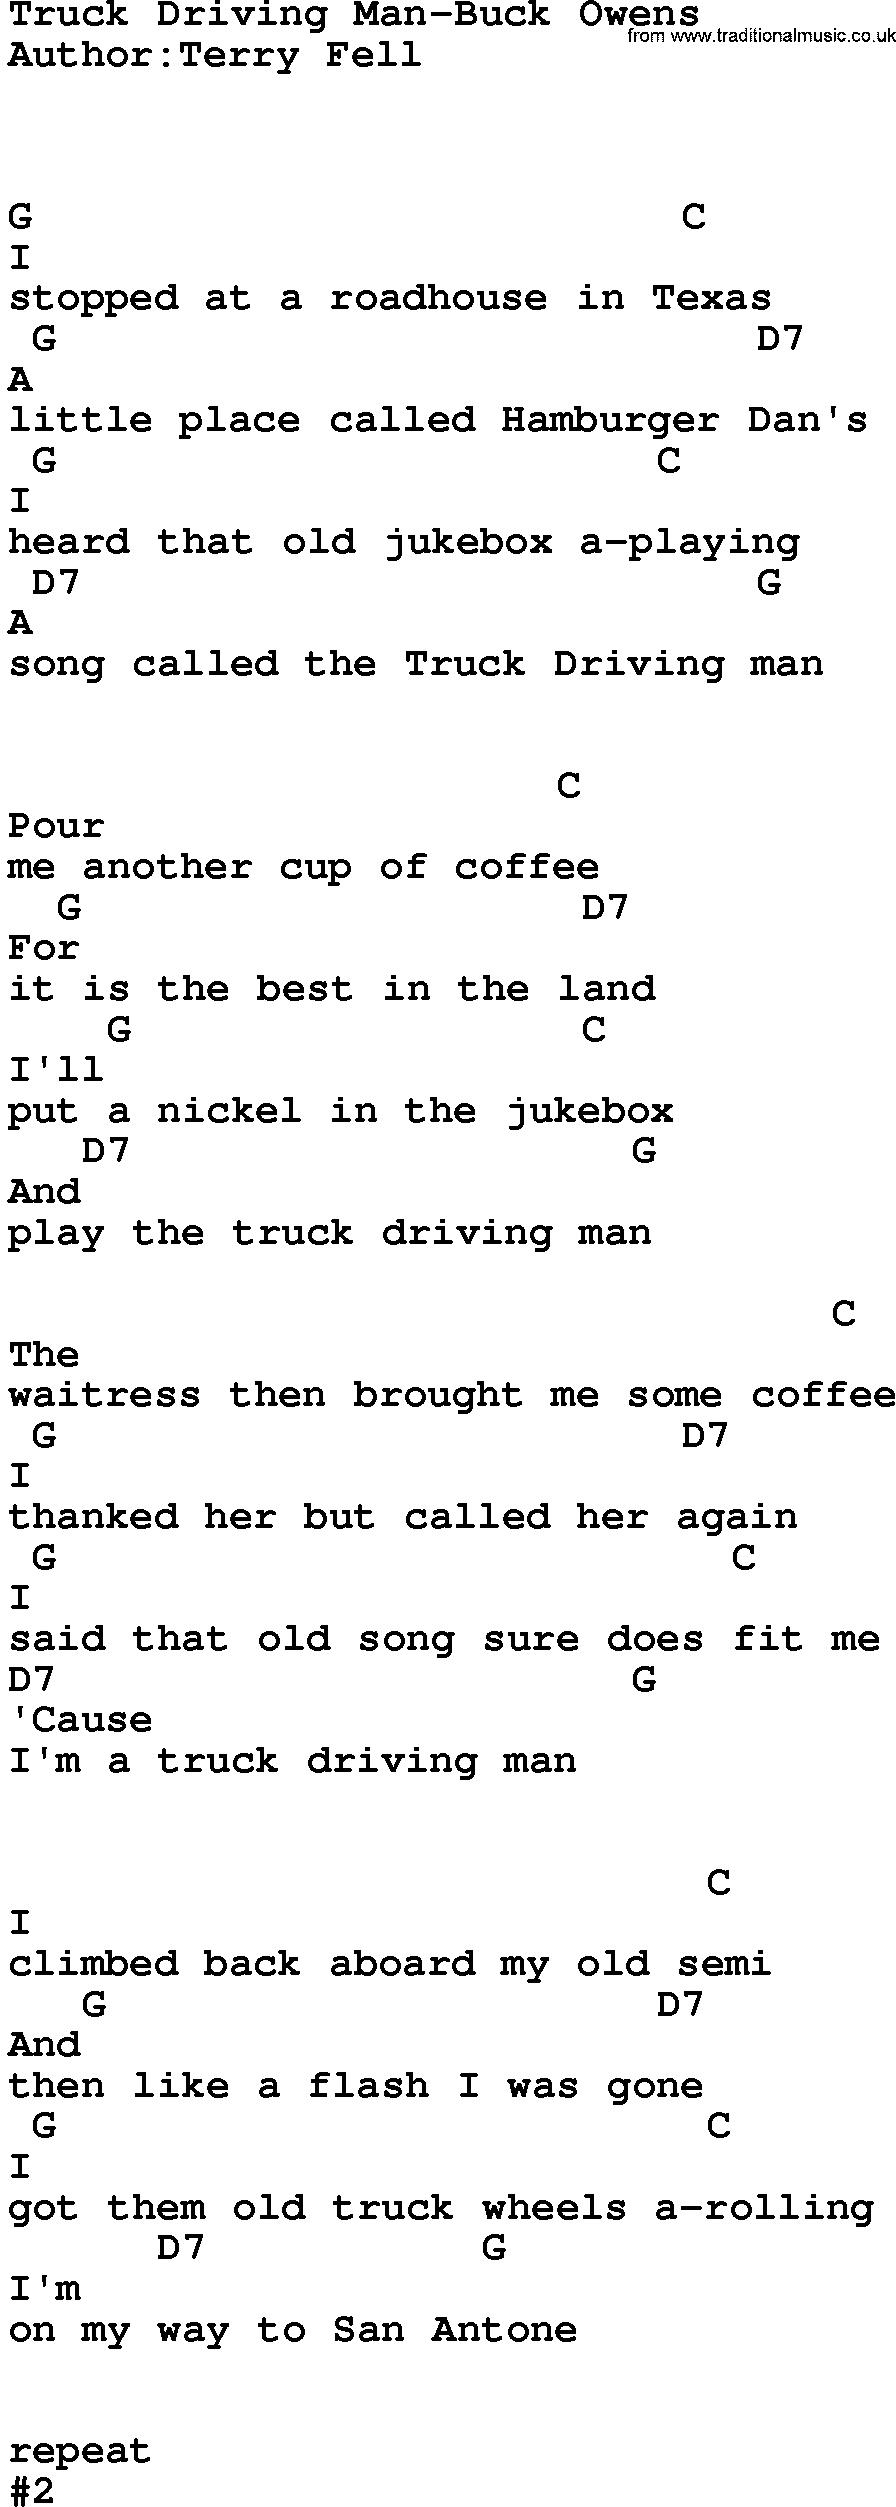 Country music song: Truck Driving Man-Buck Owens lyrics and chords